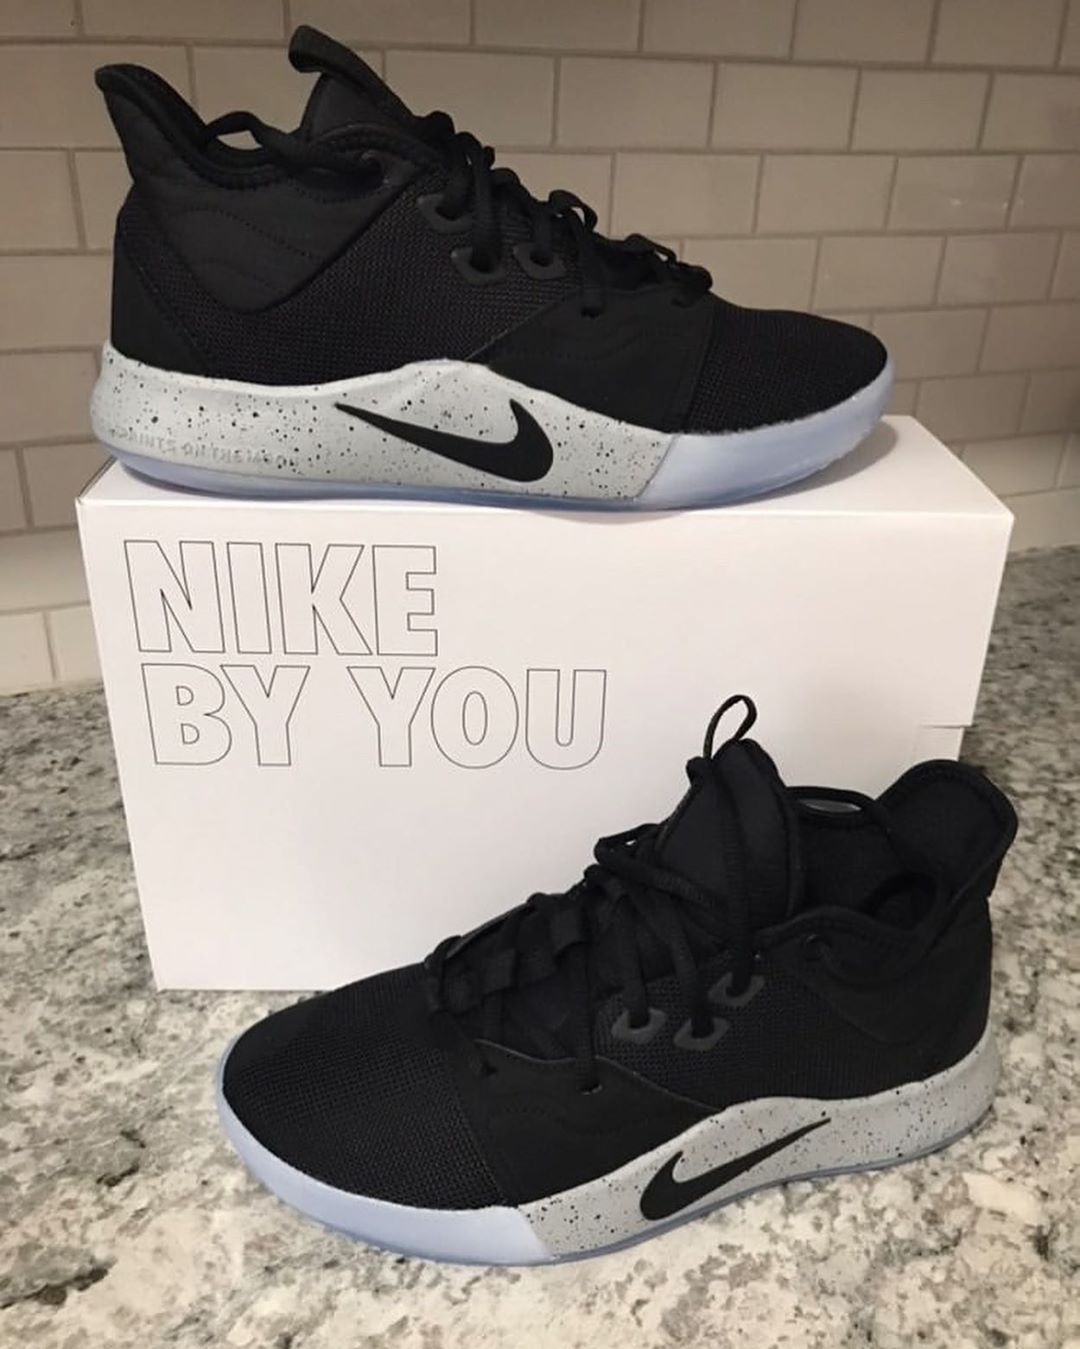 Nike By You PG 3 Black Cement